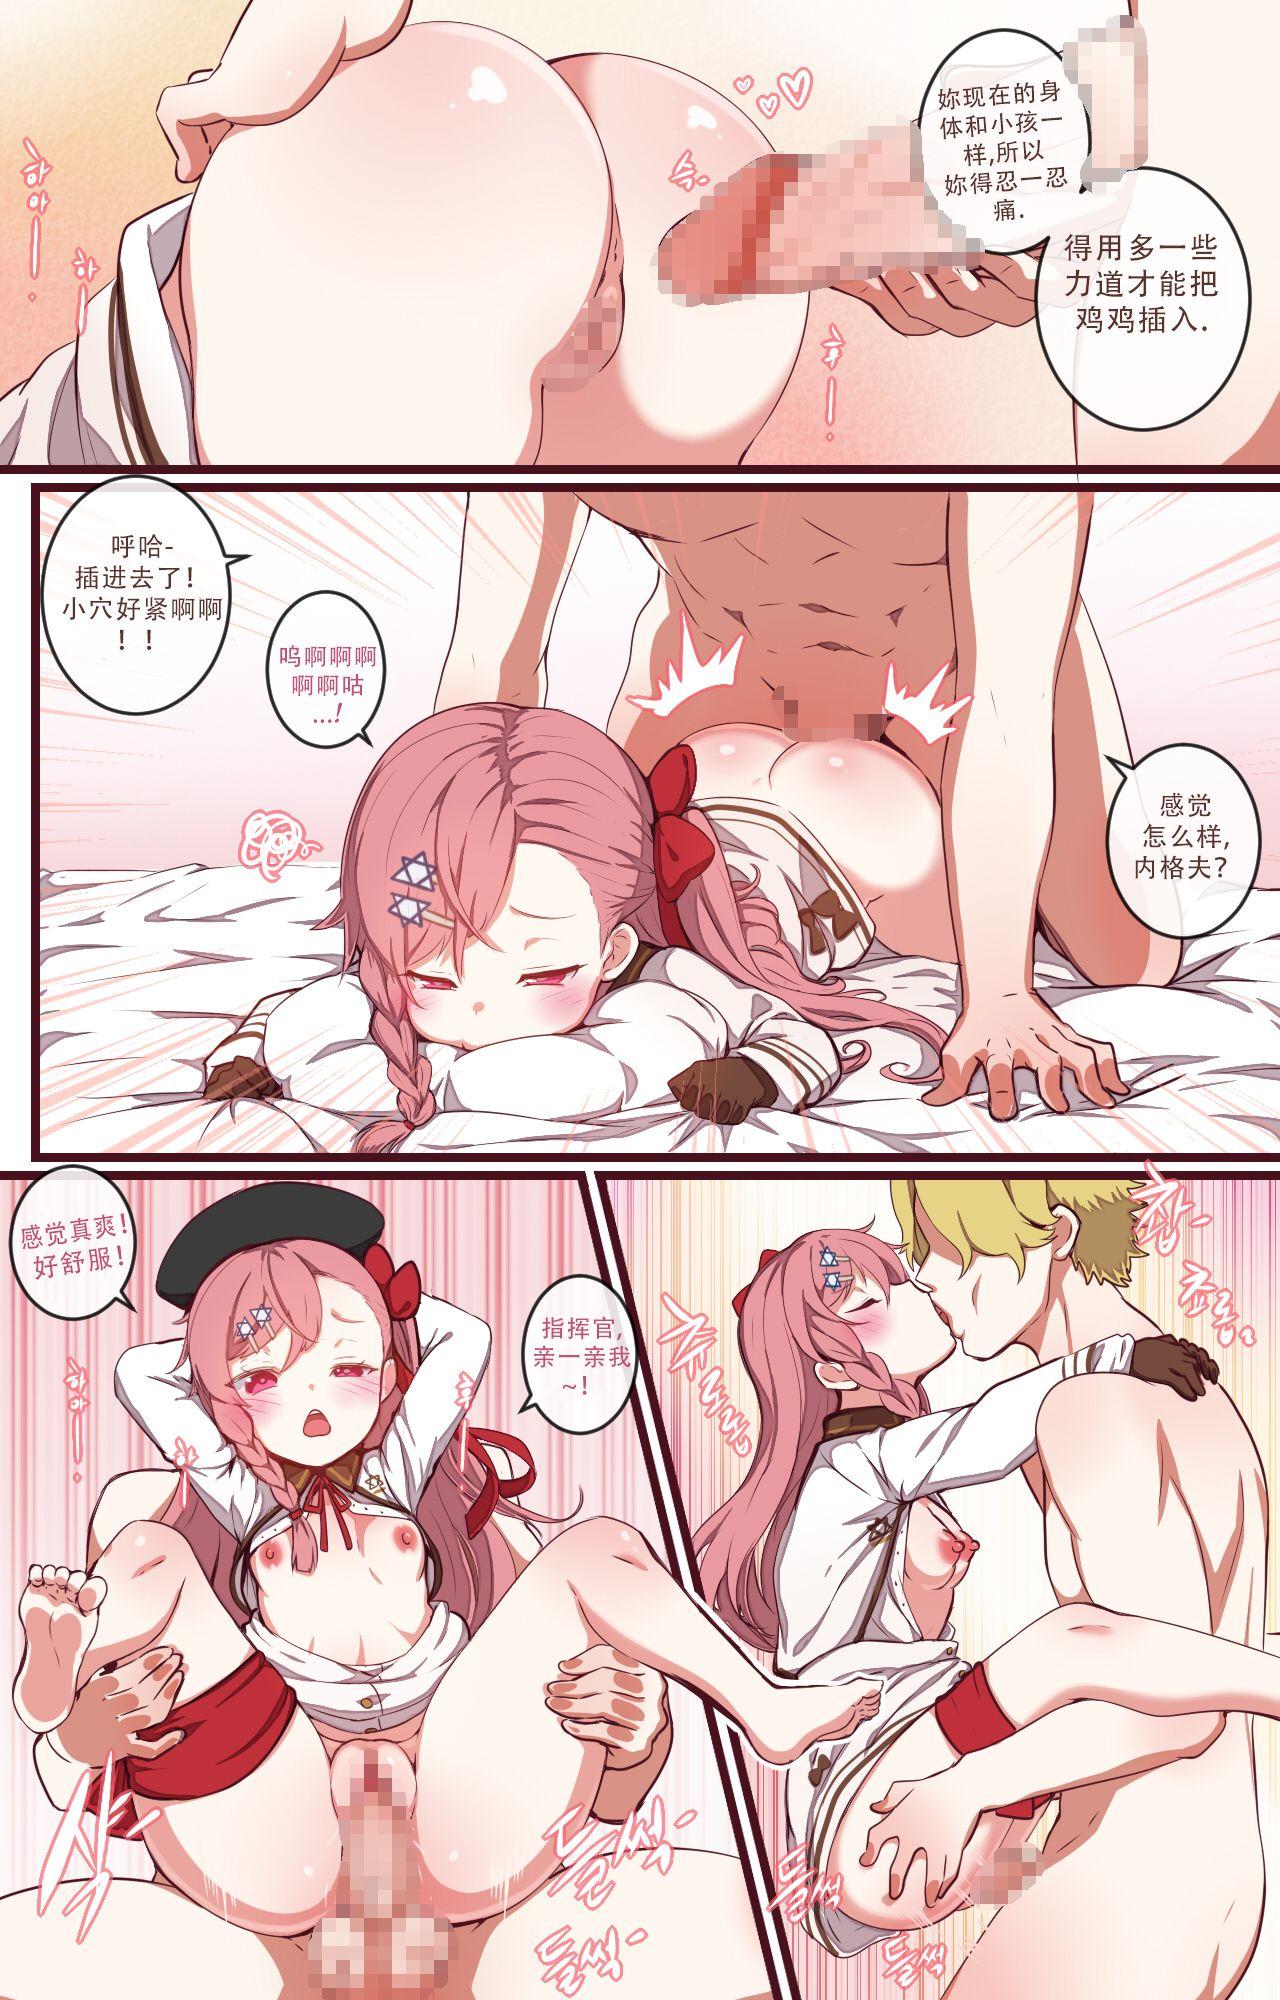 Rough Sex [yun-uyeon (ooyun)] How to use dolls 03 (Girls Frontline) [Chinese]【火狸翻译】 - Girls frontline Hotwife - Page 12